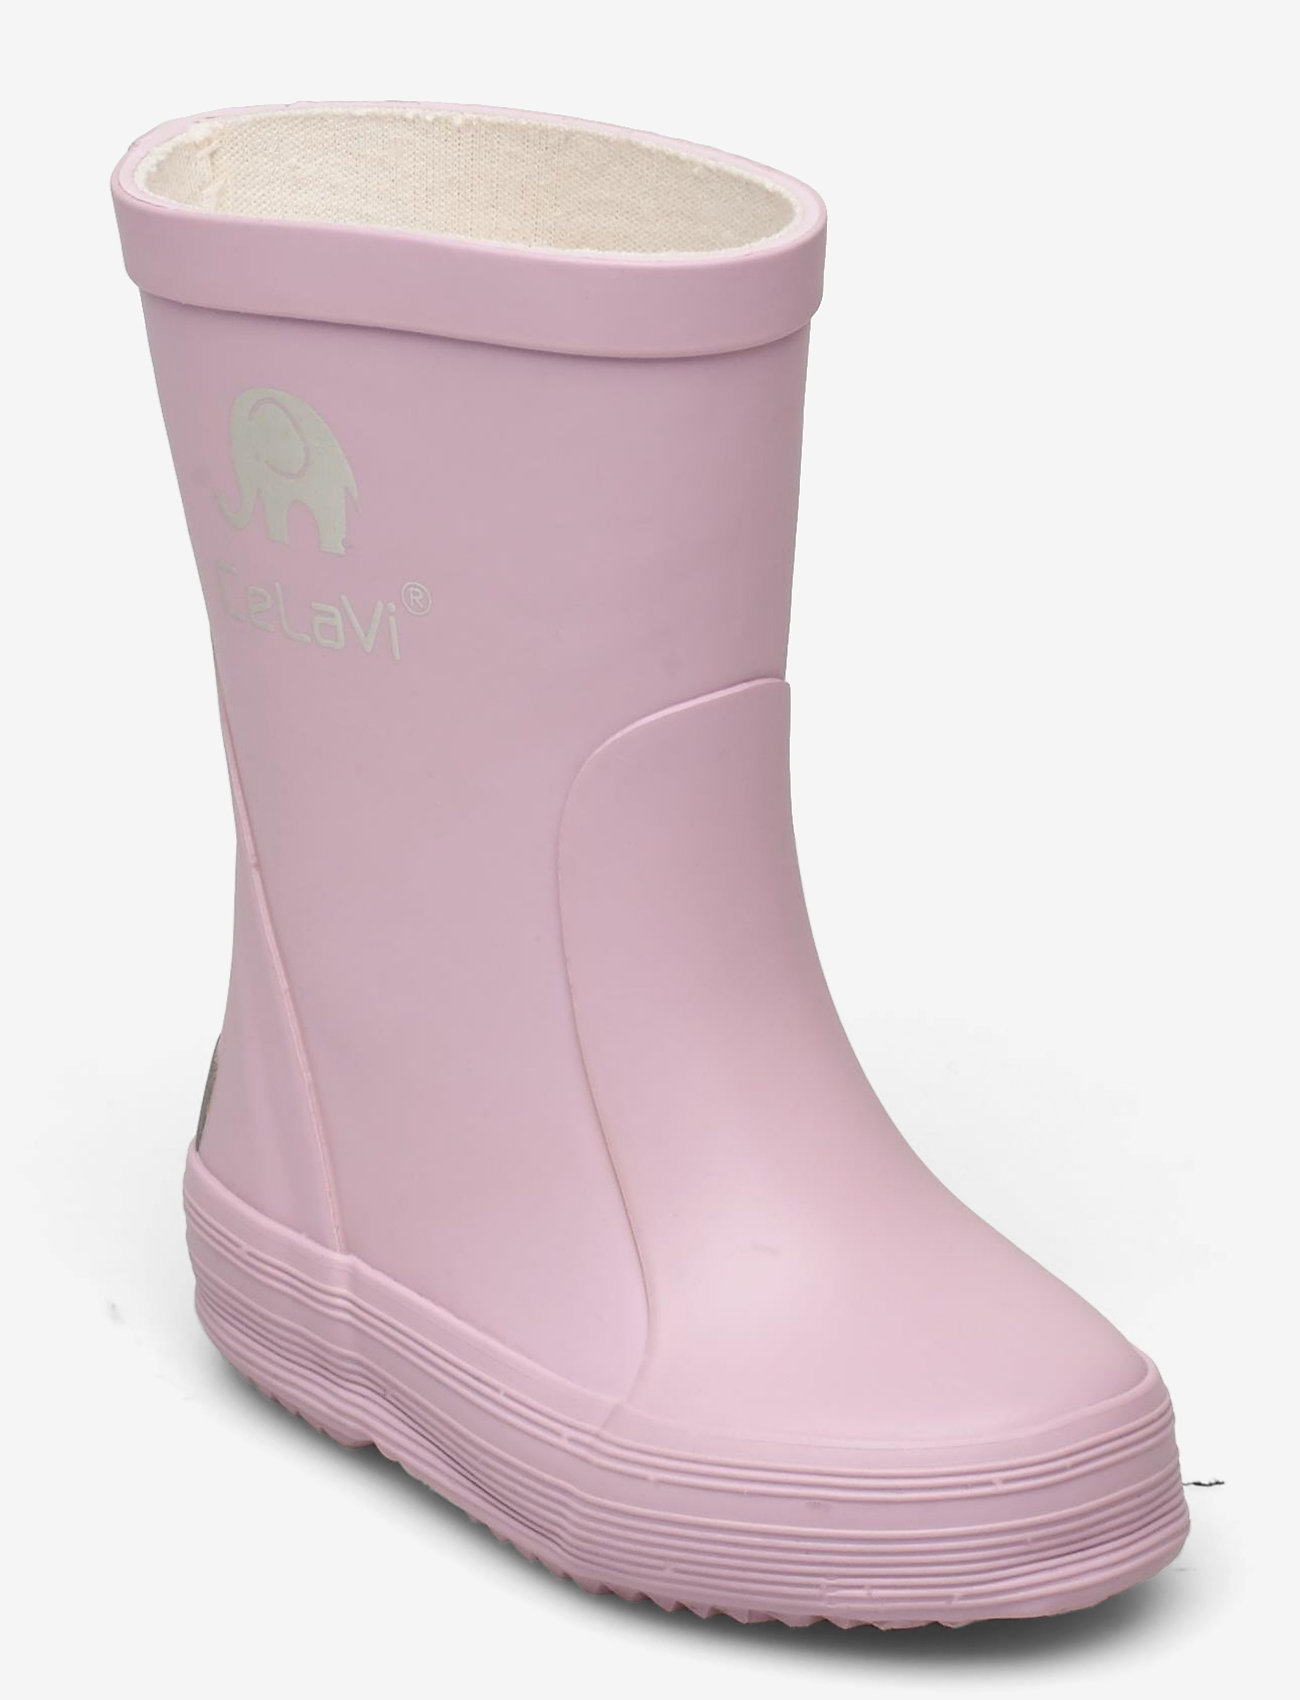 CeLaVi - Basic wellies -solid - unlined rubberboots - mauve shadow - 0